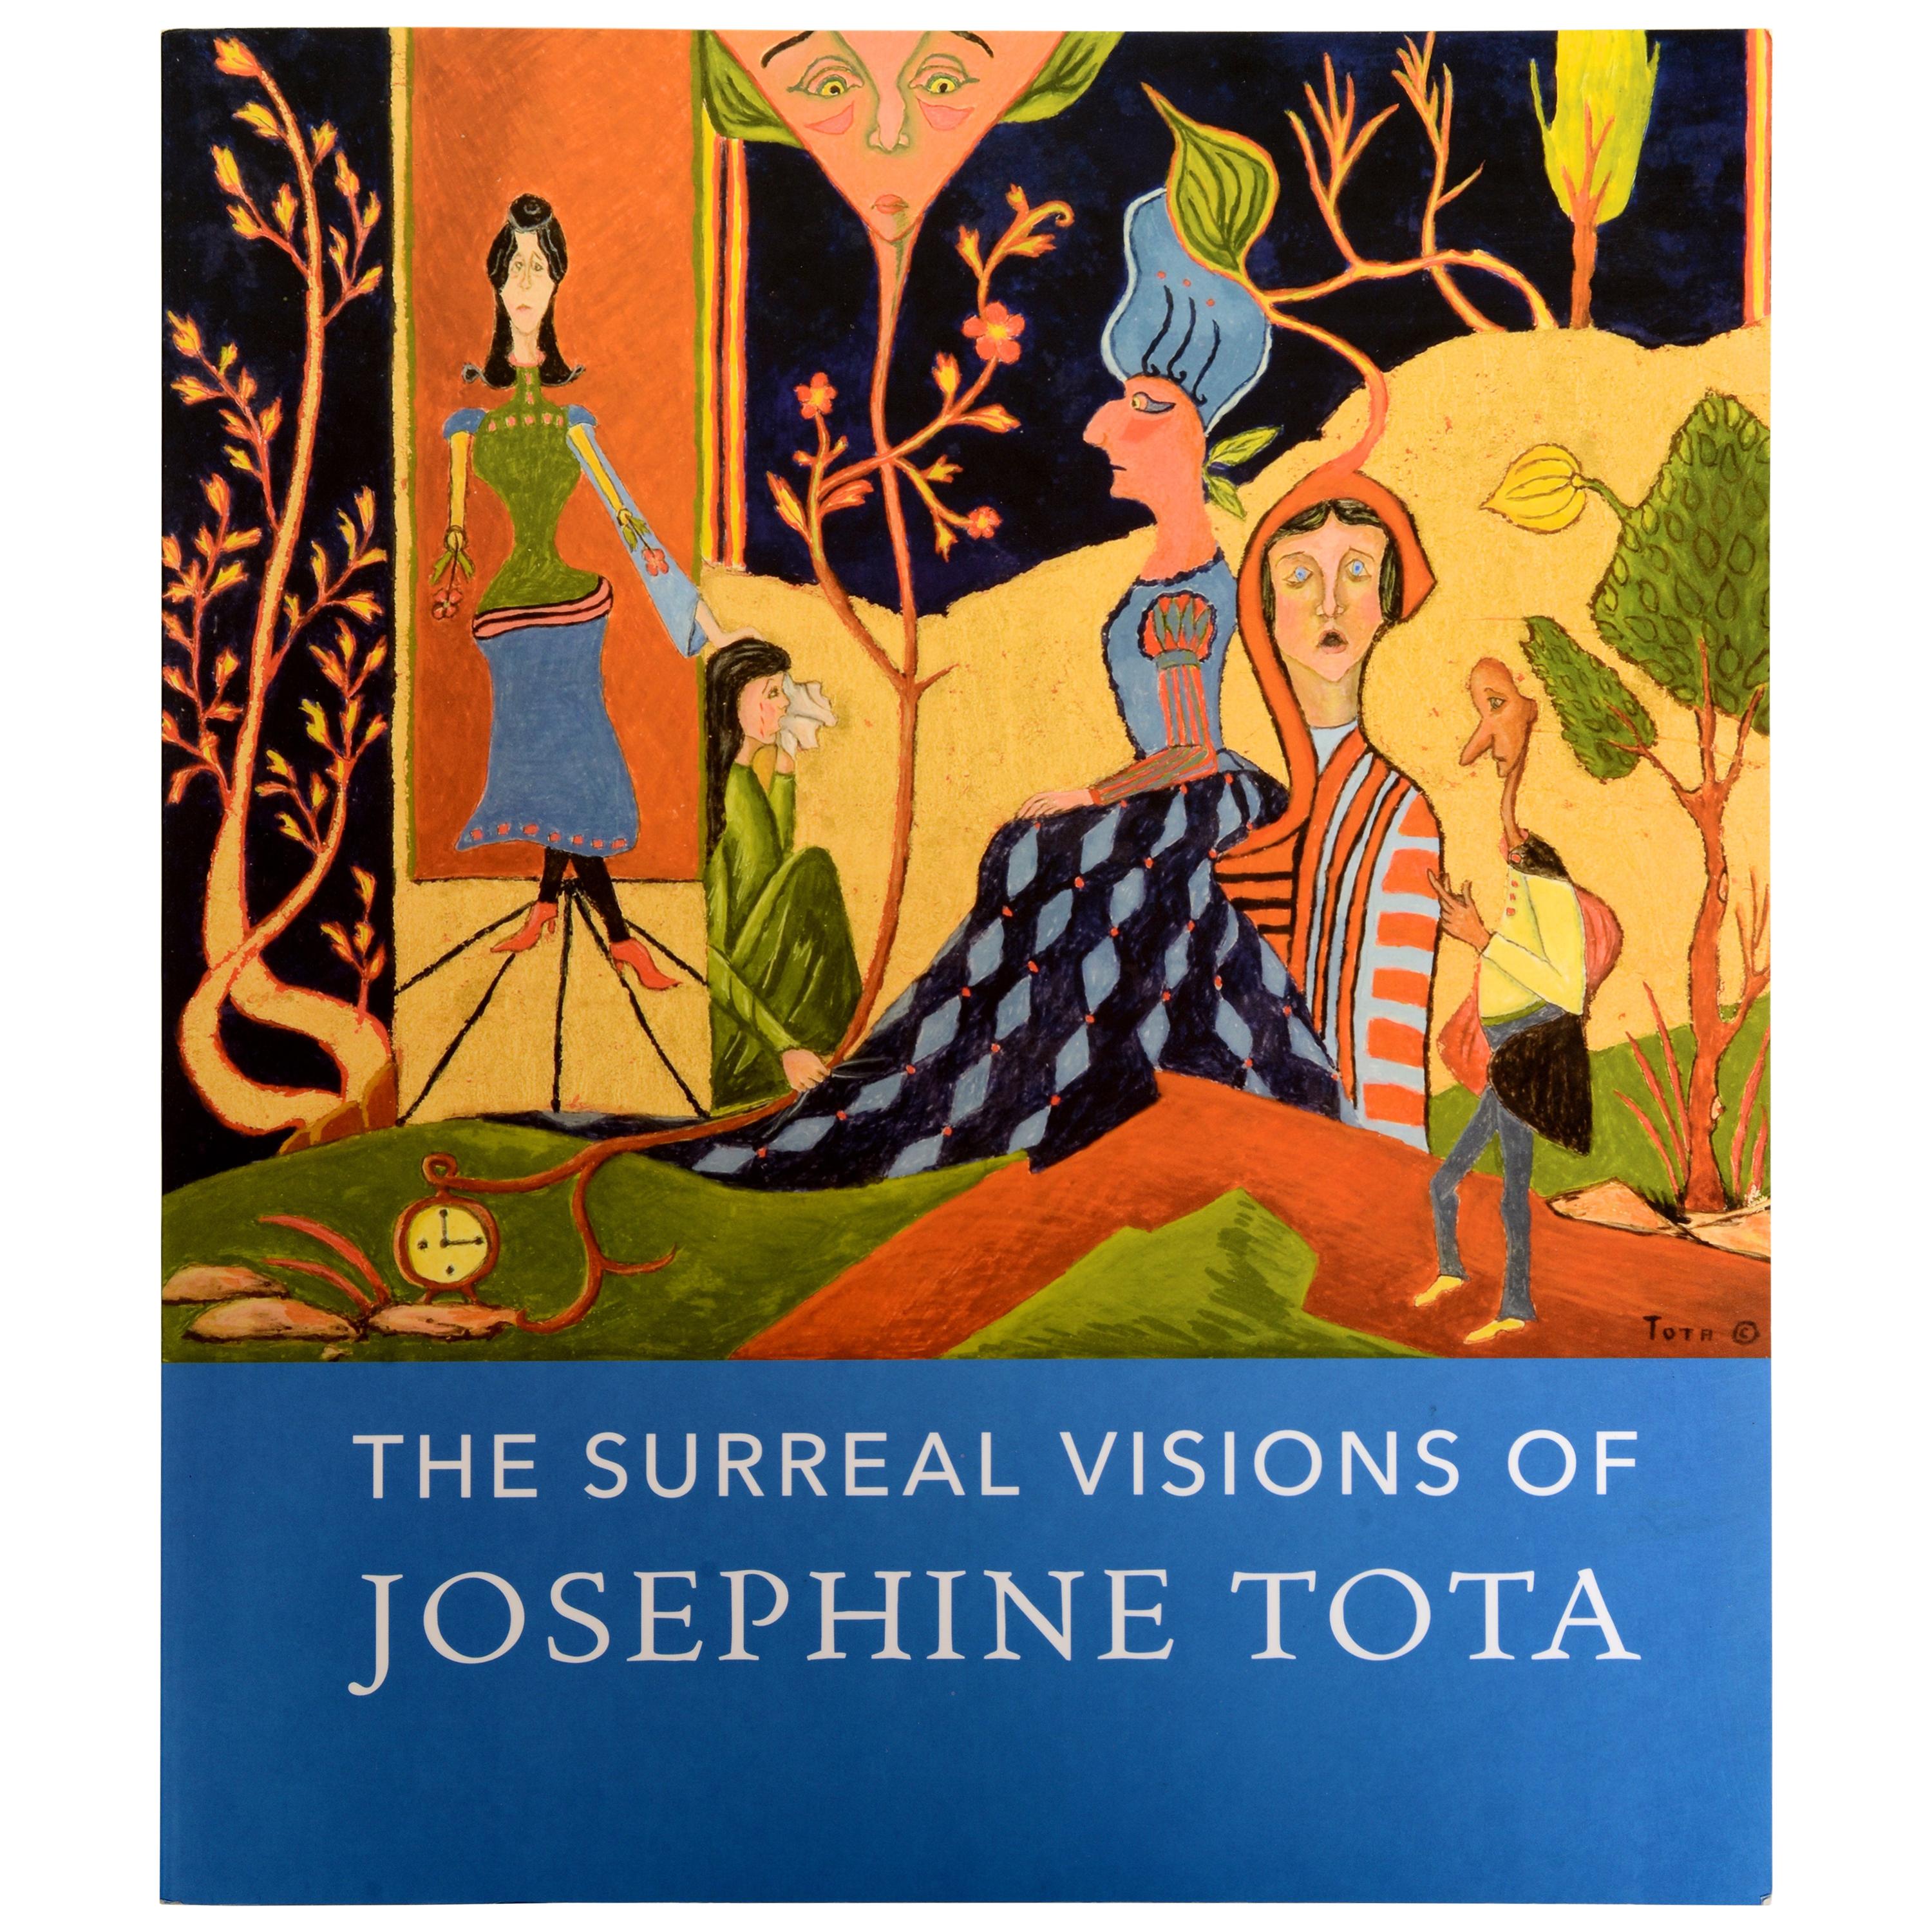 The Surreal Visions of Josephine Tota by Jessica Marten, 1st Ed